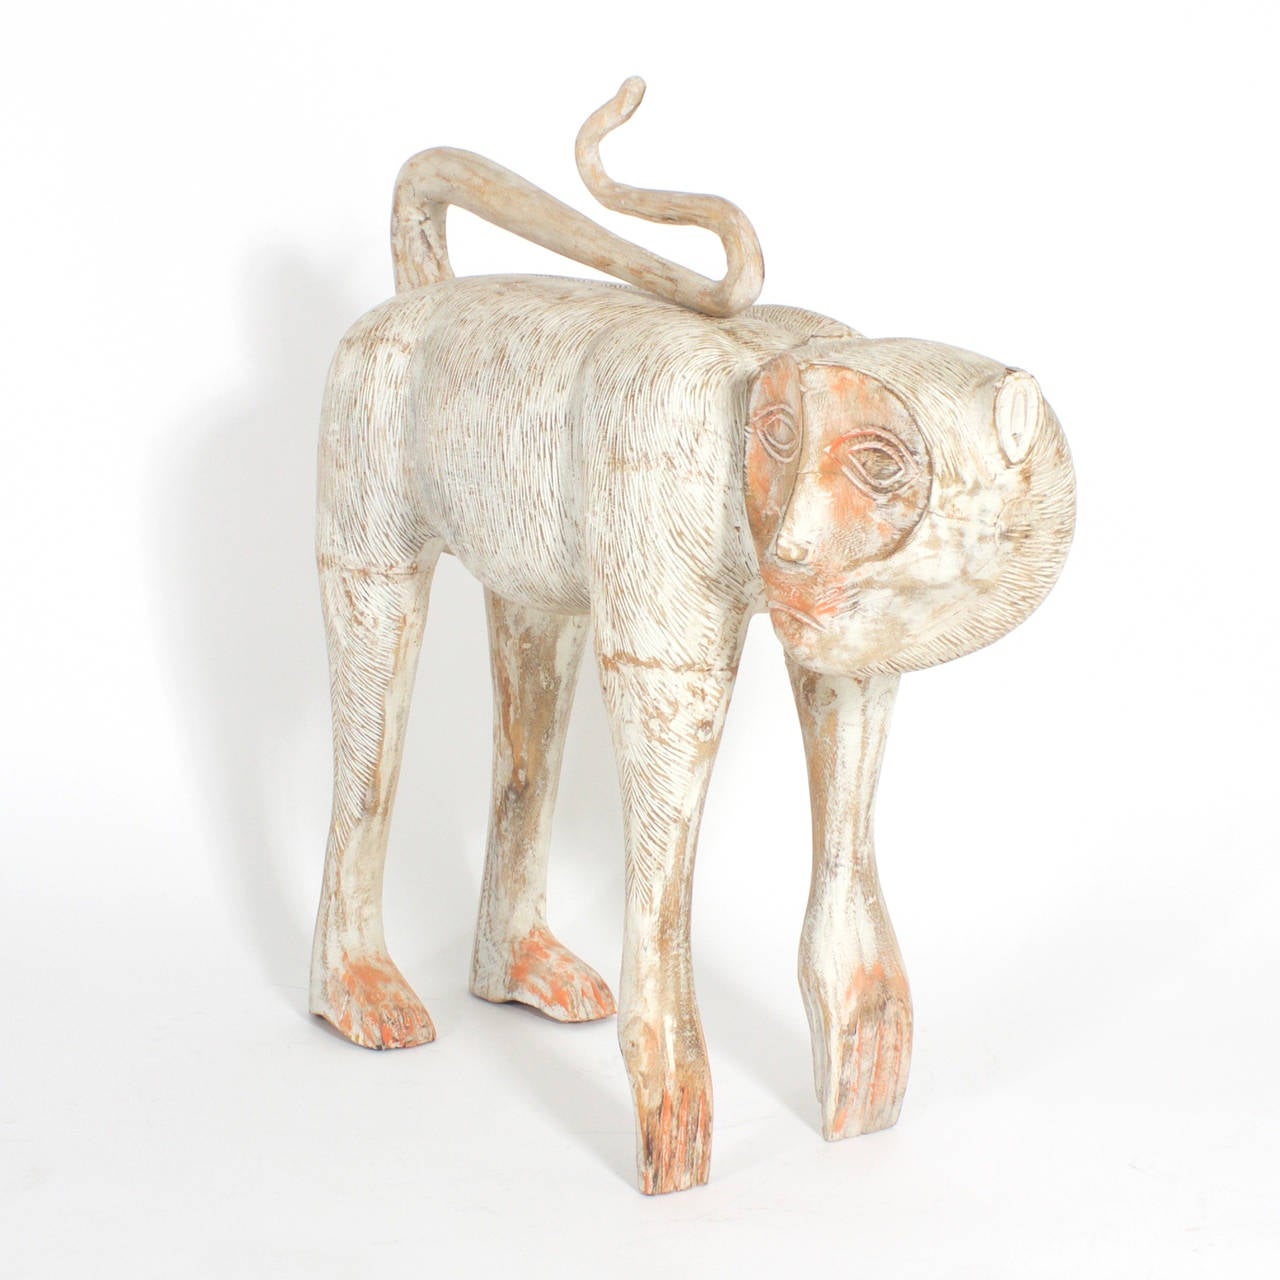 Mid-Century carved wooden monkey with attitude finished with a distressed, and time worn look. Featuring a curious, removable tail and an overall Primitive tribal vibe.